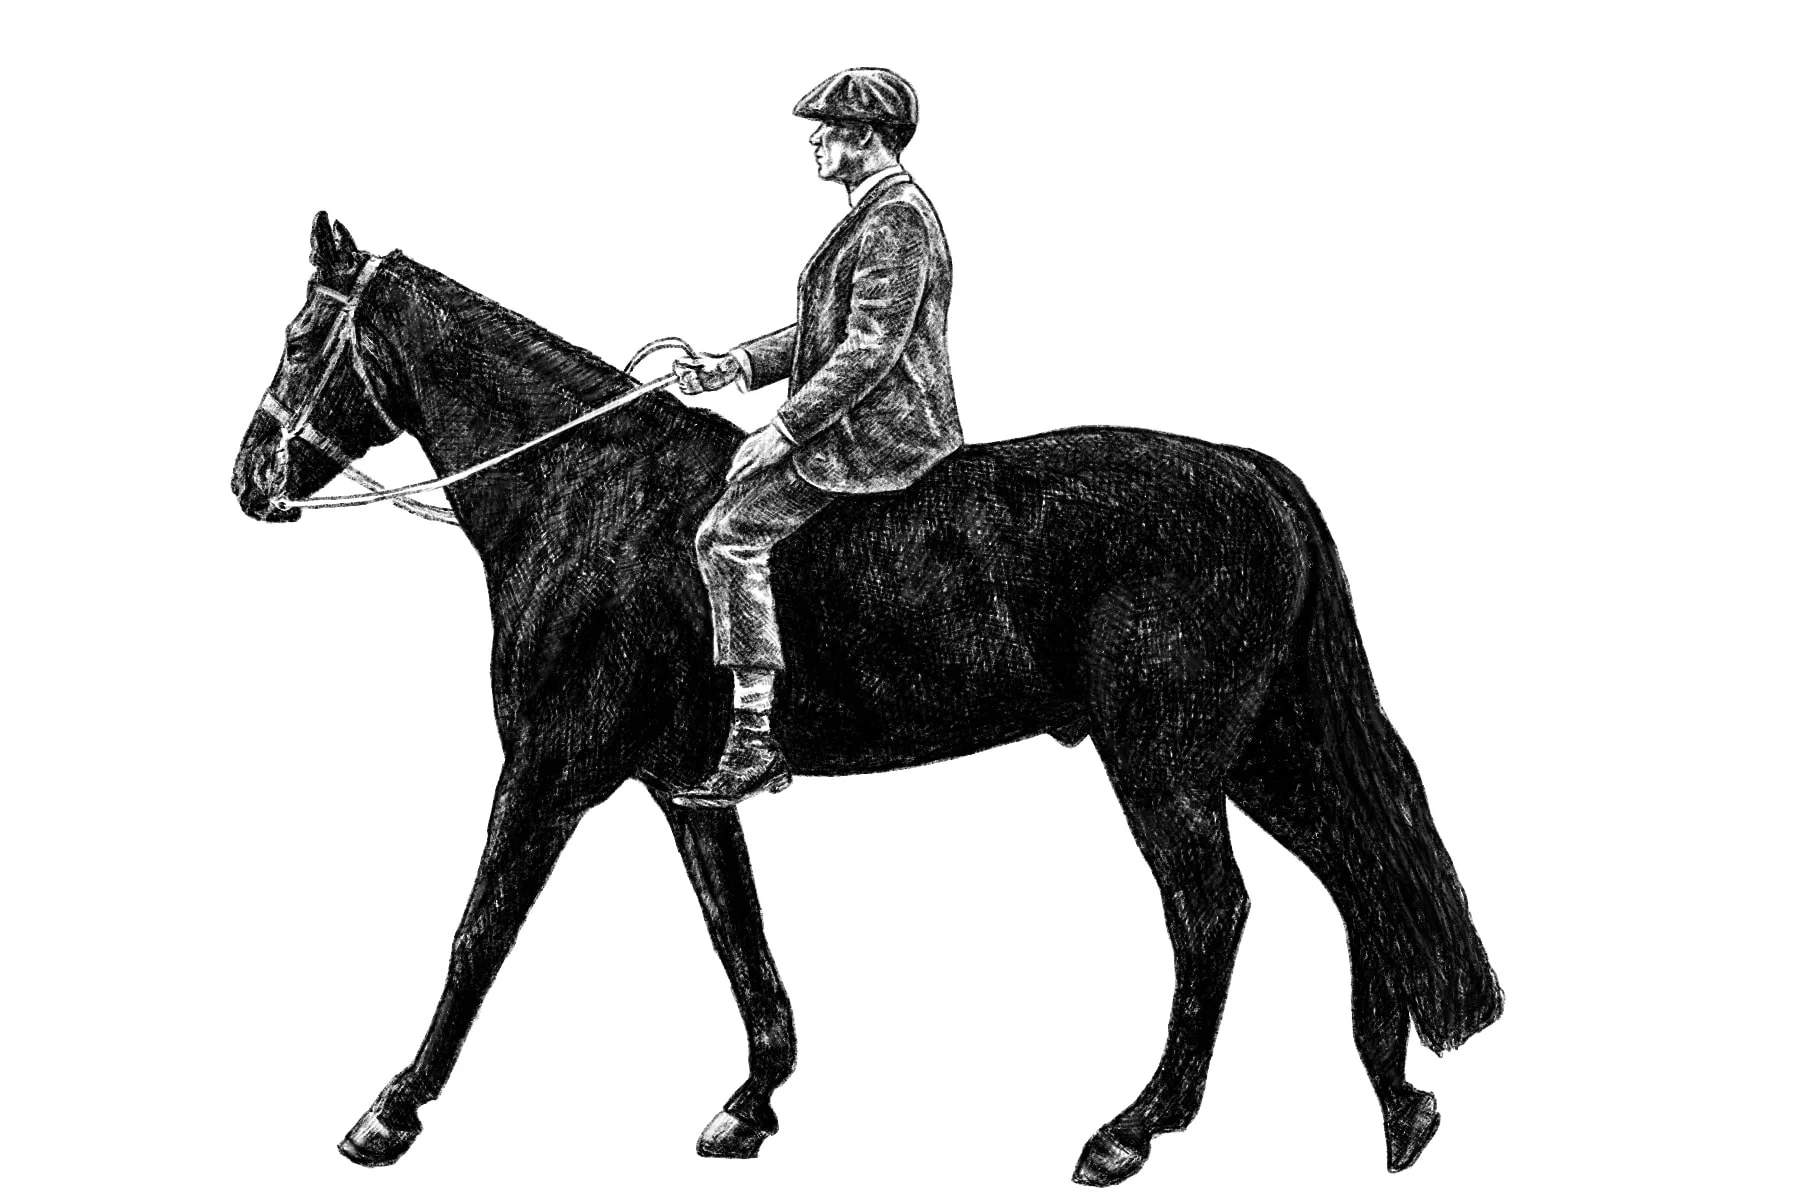 Digital drawing of Thomas Shelby on horse